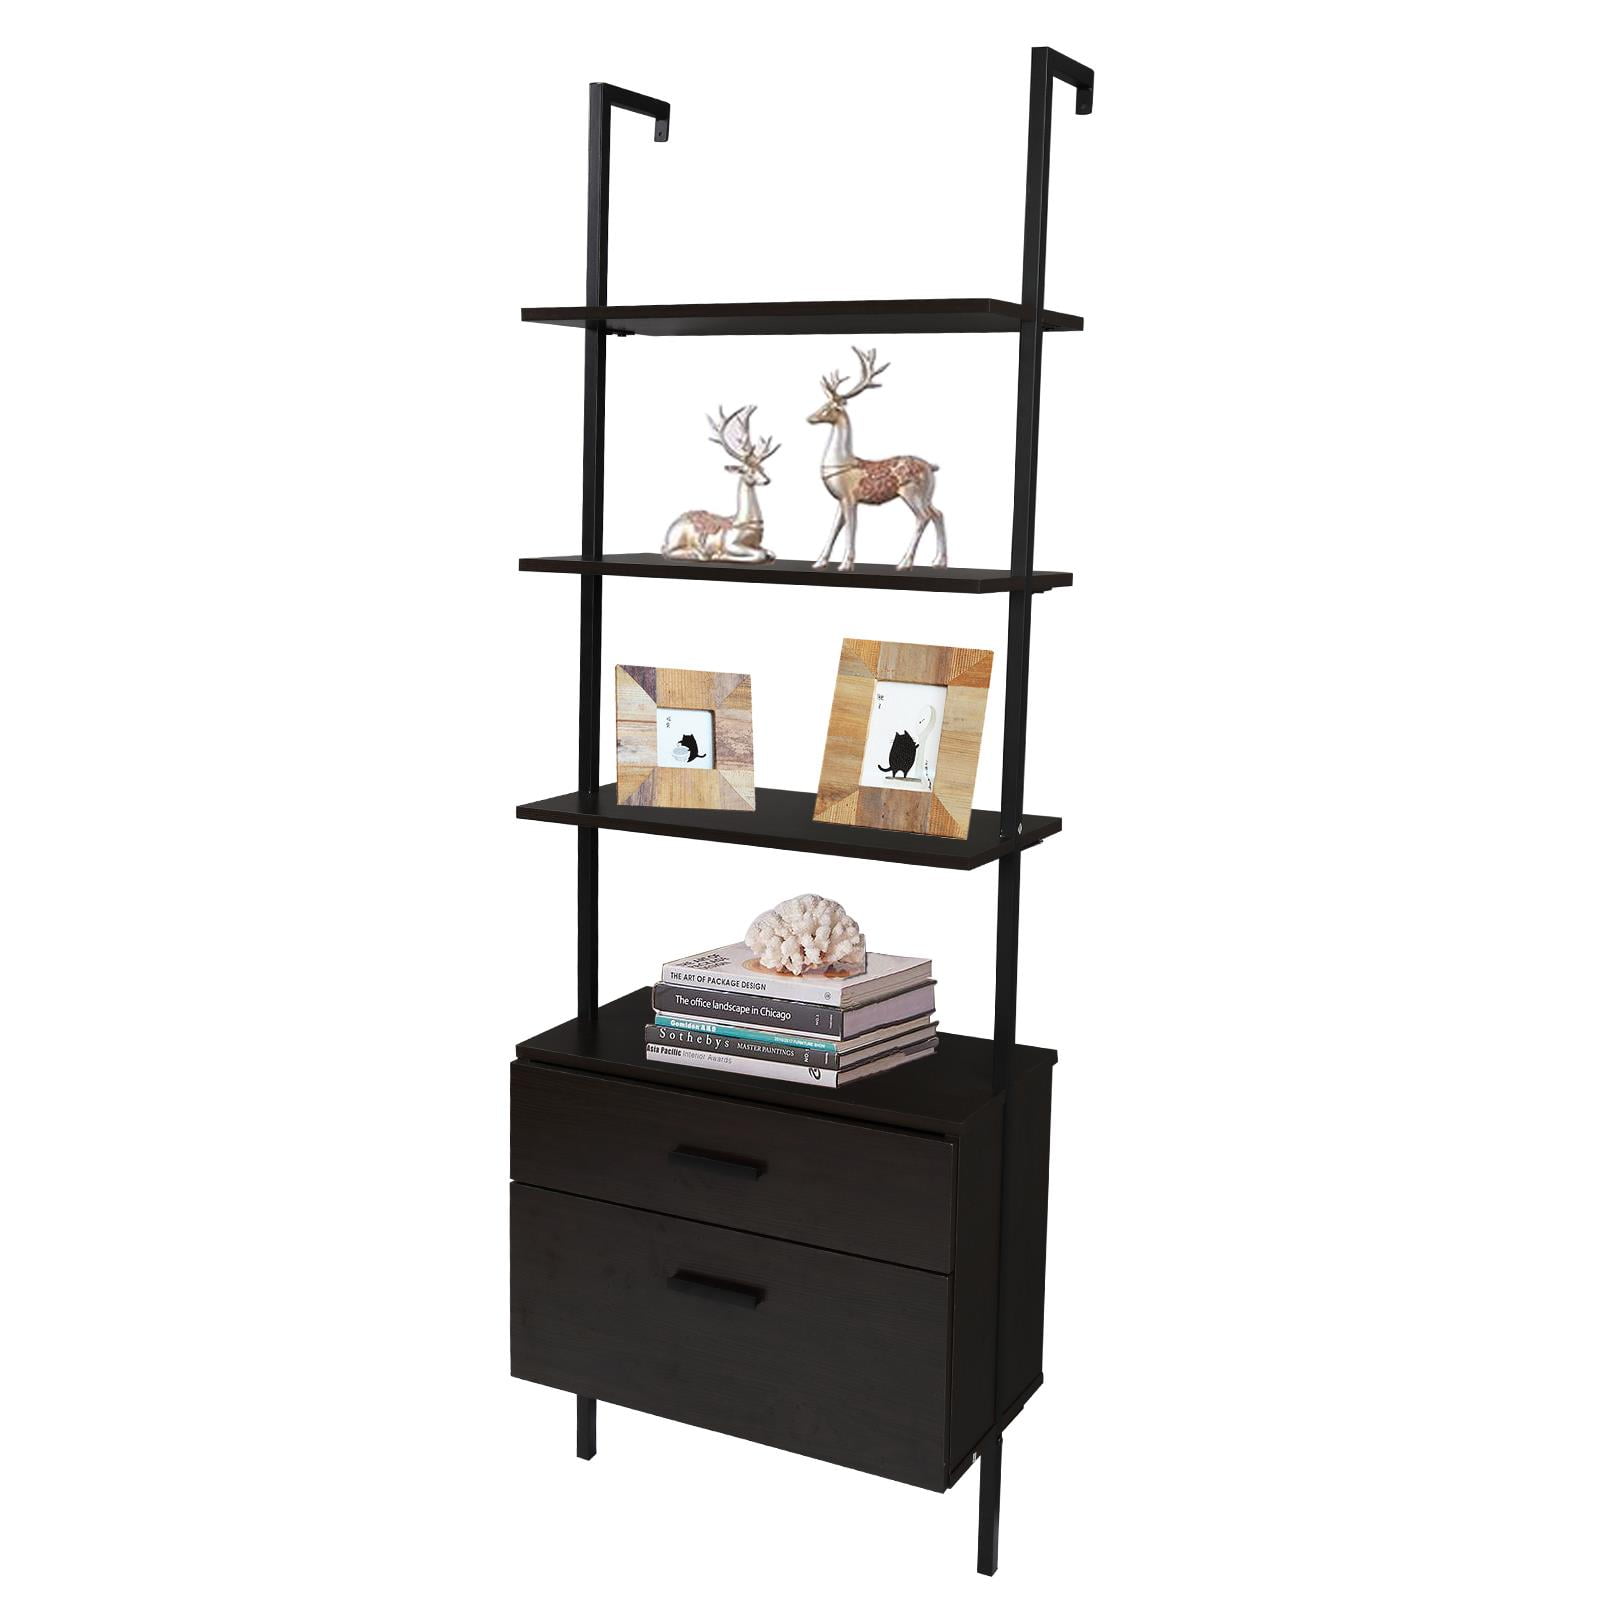 3 Tier Industrial Wood Ladder Bookcase, Black Shelving Unit With Drawers